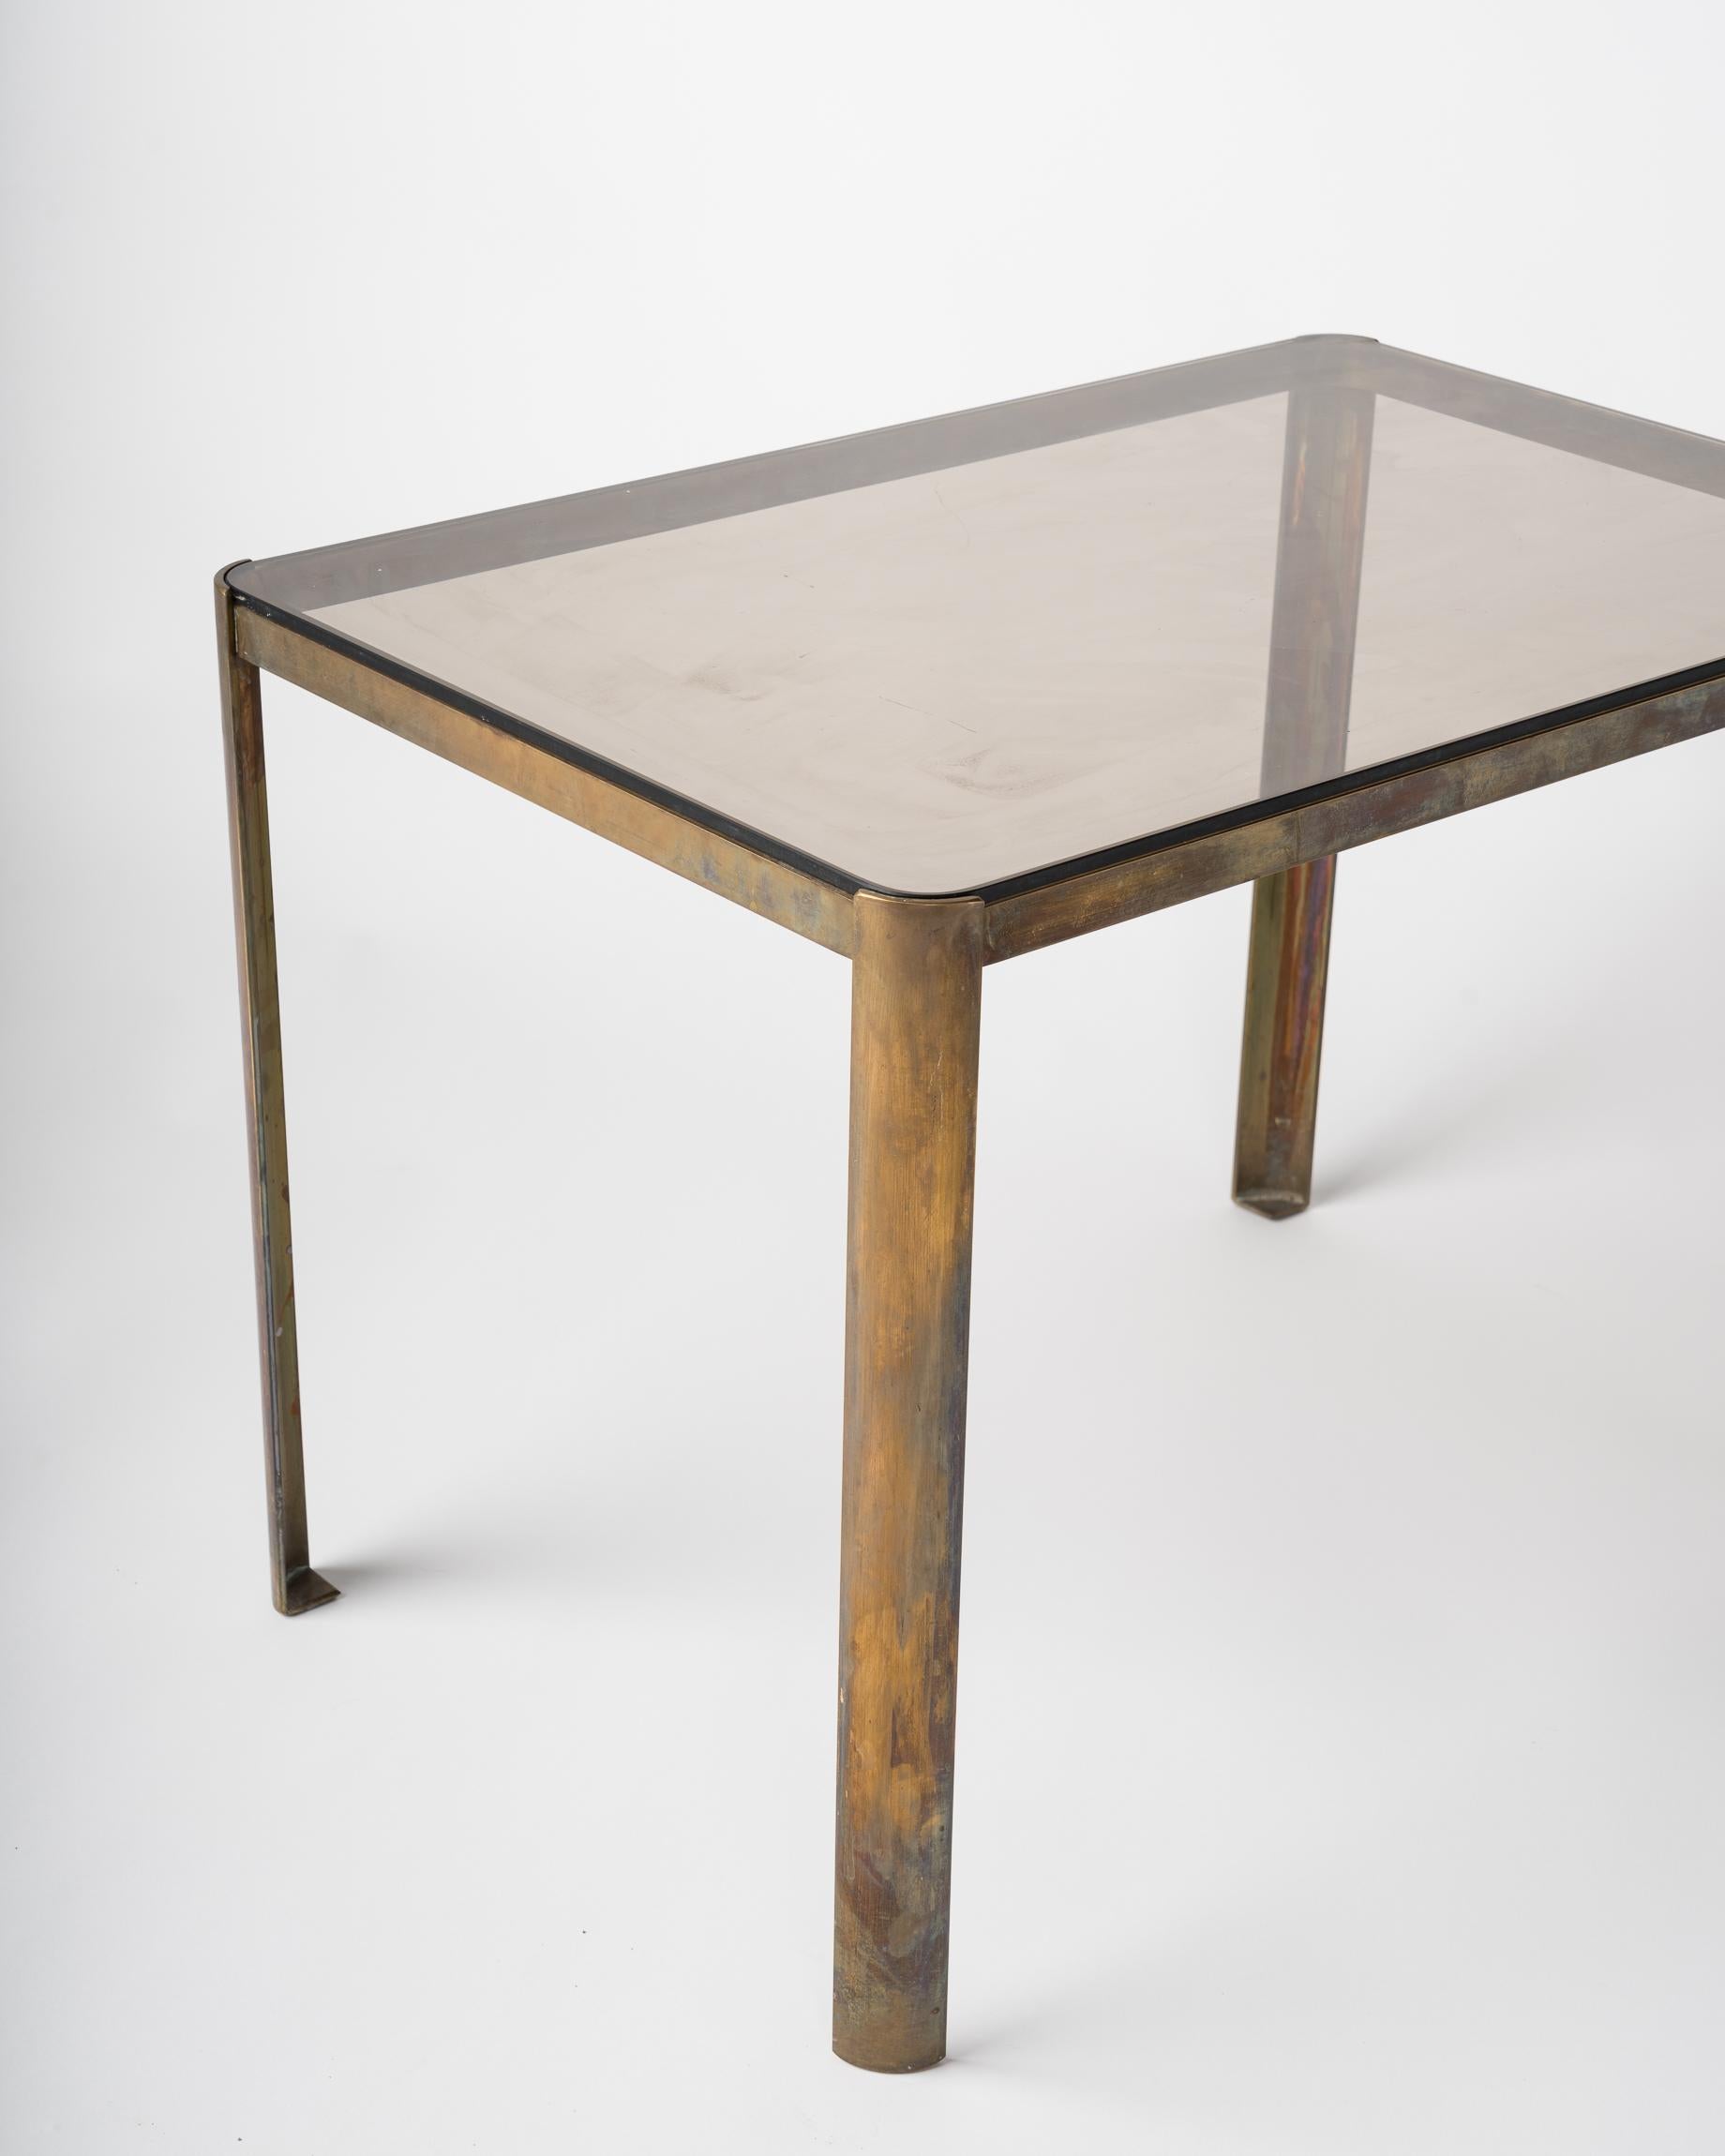 Patinated solid bronze side table. Broncz, attributed to Jacques Quinet for Maison Malabert. 
Price does not include shipping nor possible duties related charges.